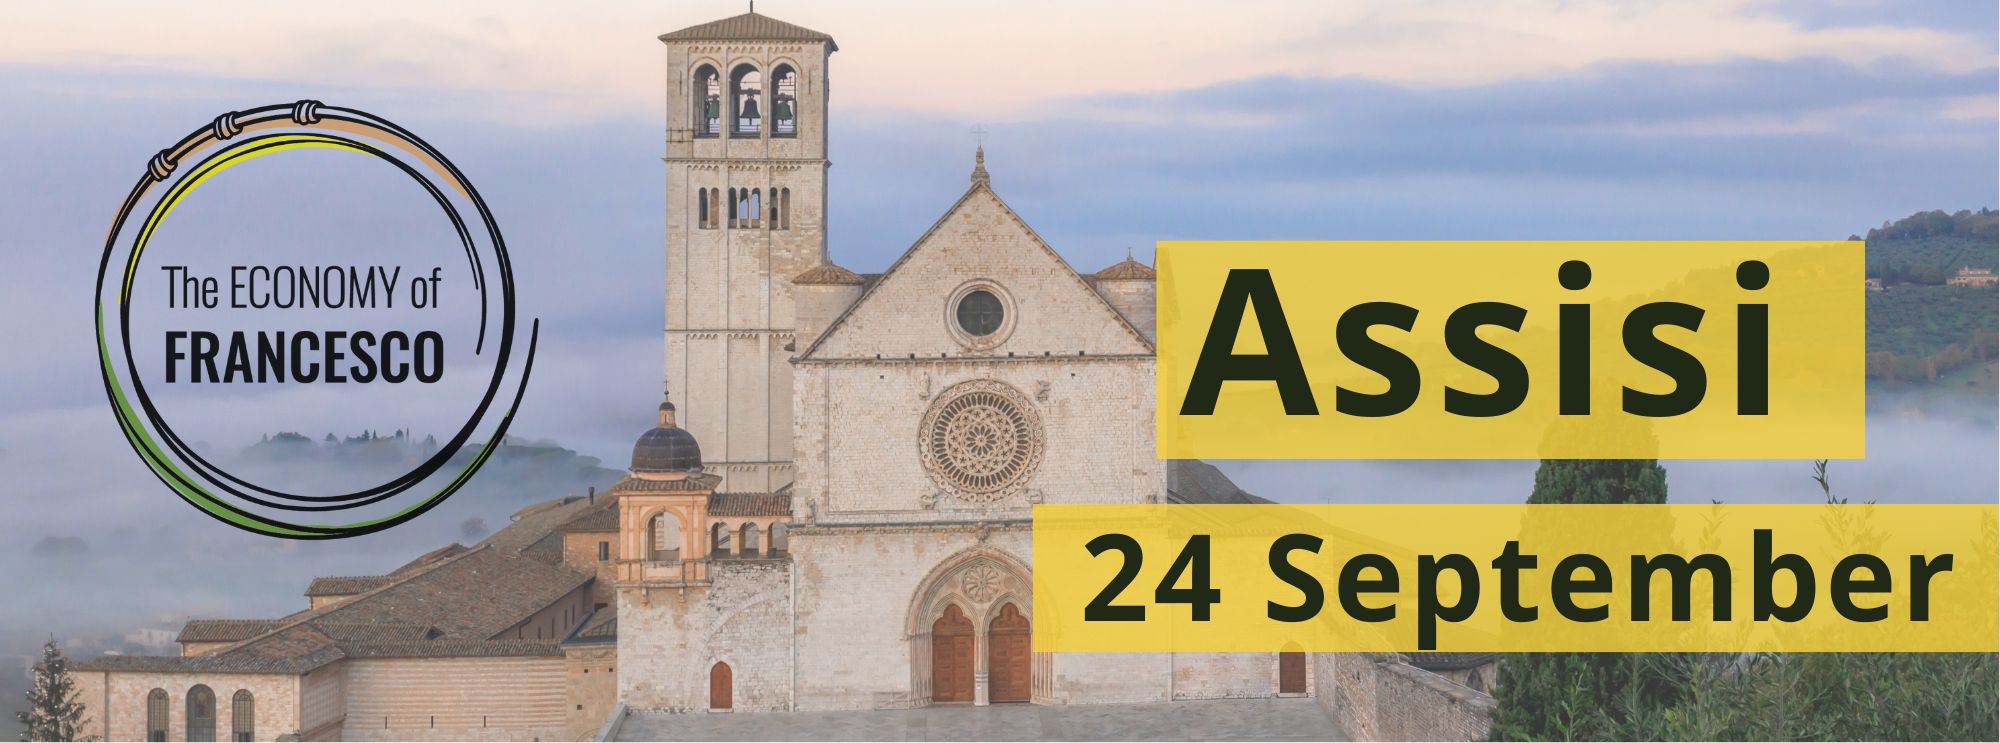 Visit of the Holy Father Francis to Assisi for the 'Economy of Francesco' event [24 September 2022]